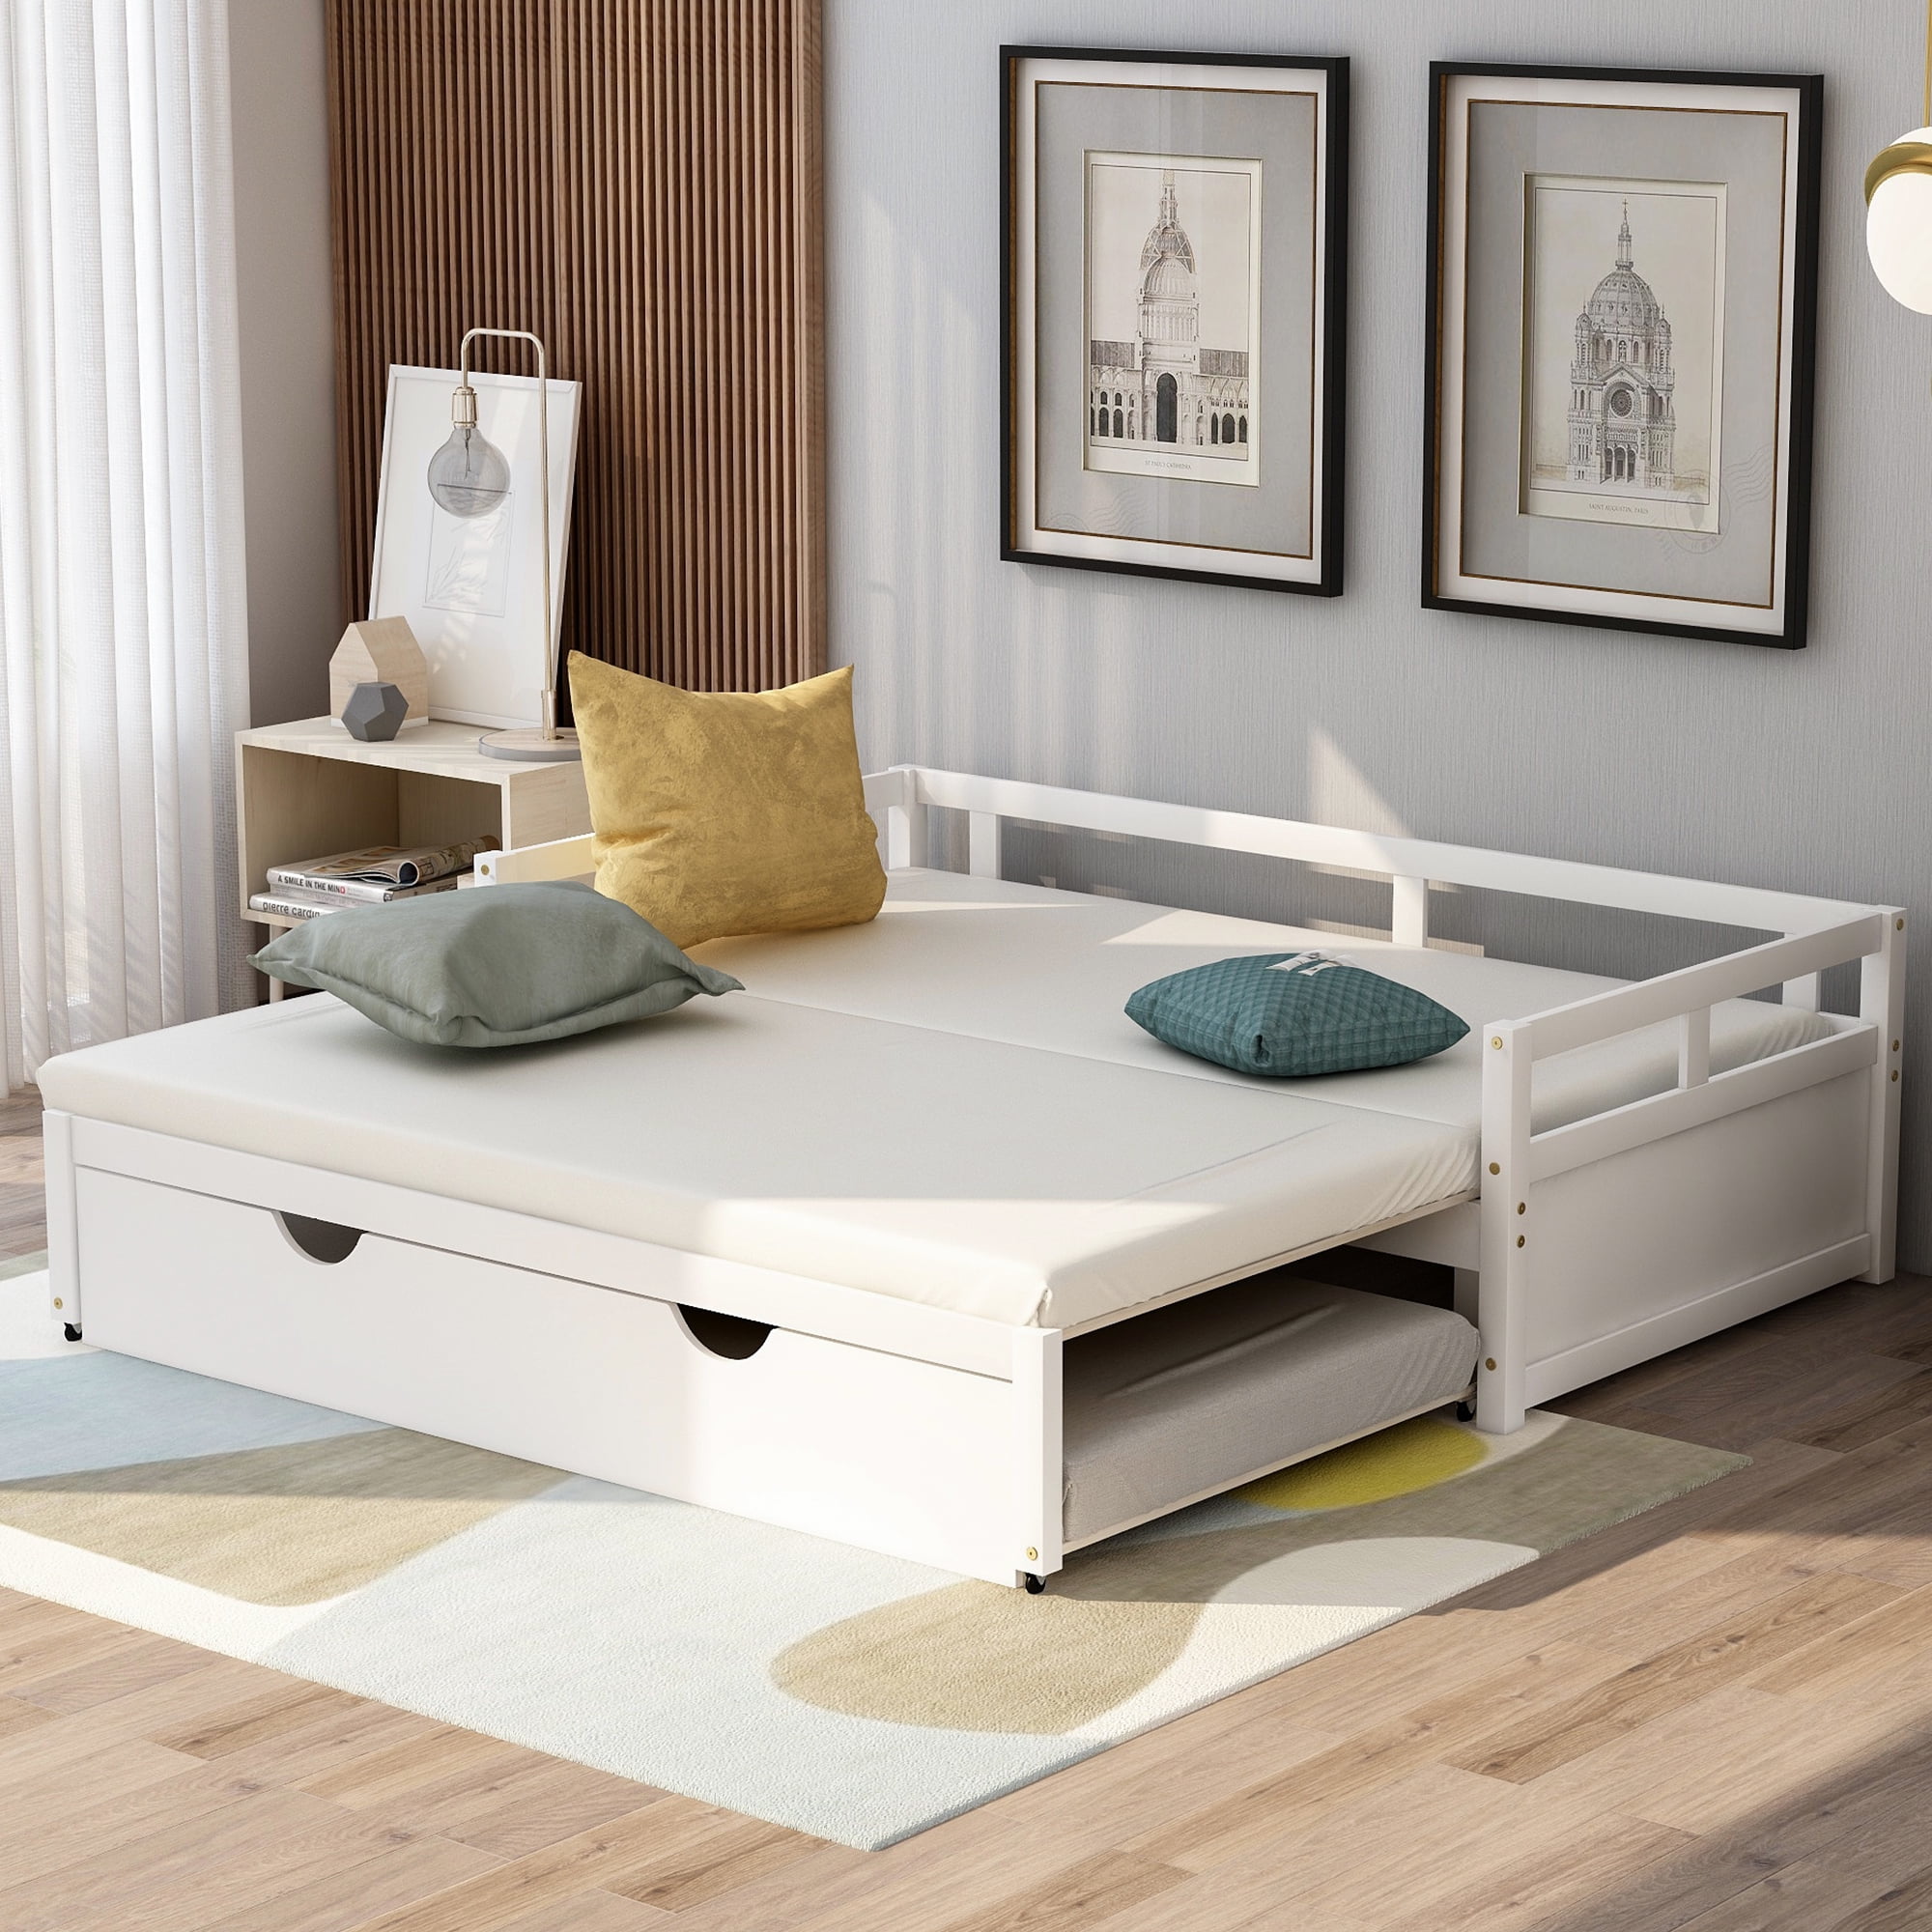 Details about   Twin Size Trundle Daybed Wooden Slat Support Couch Platform Kids Espresso White 